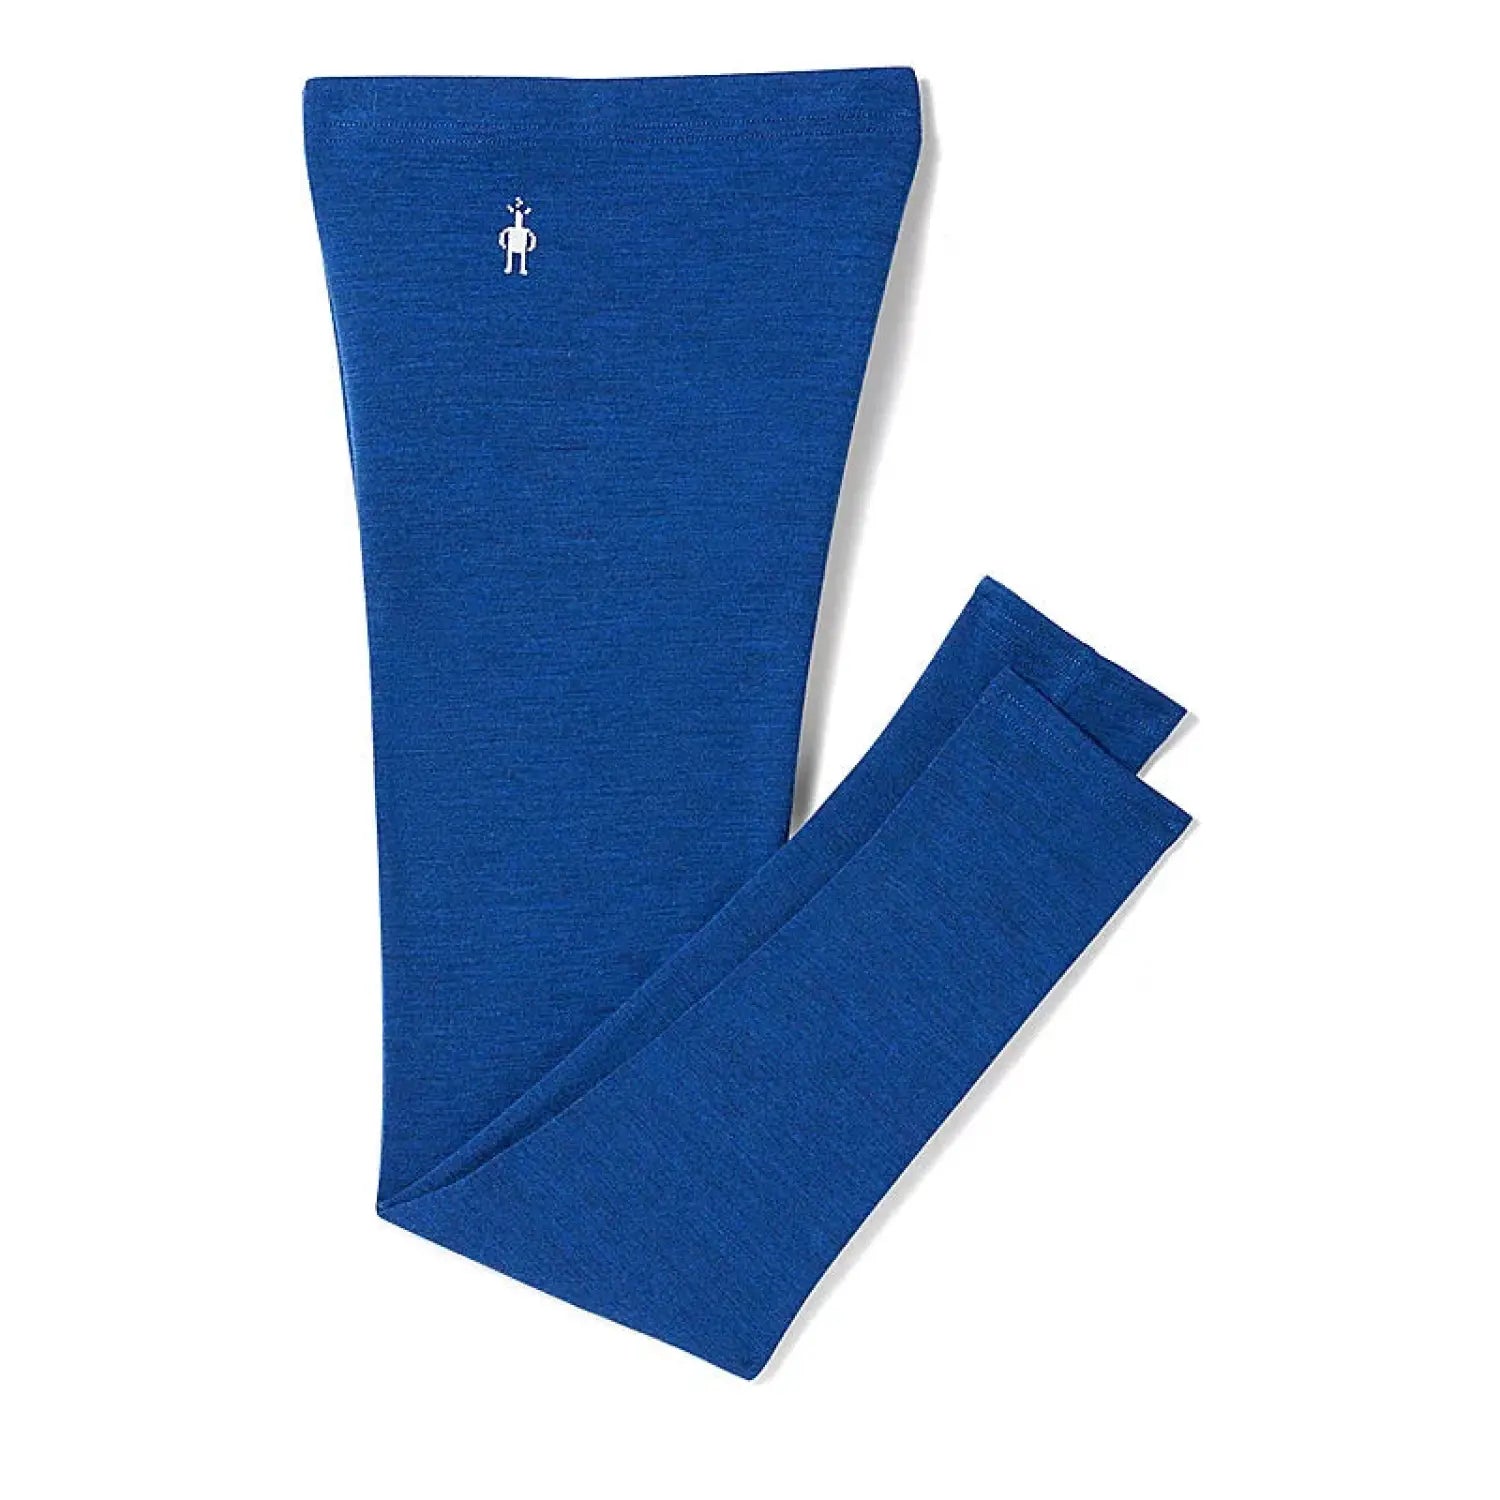 Smartwool Thermal Merino wool base layer bottom in Blueberry Hill Blue.